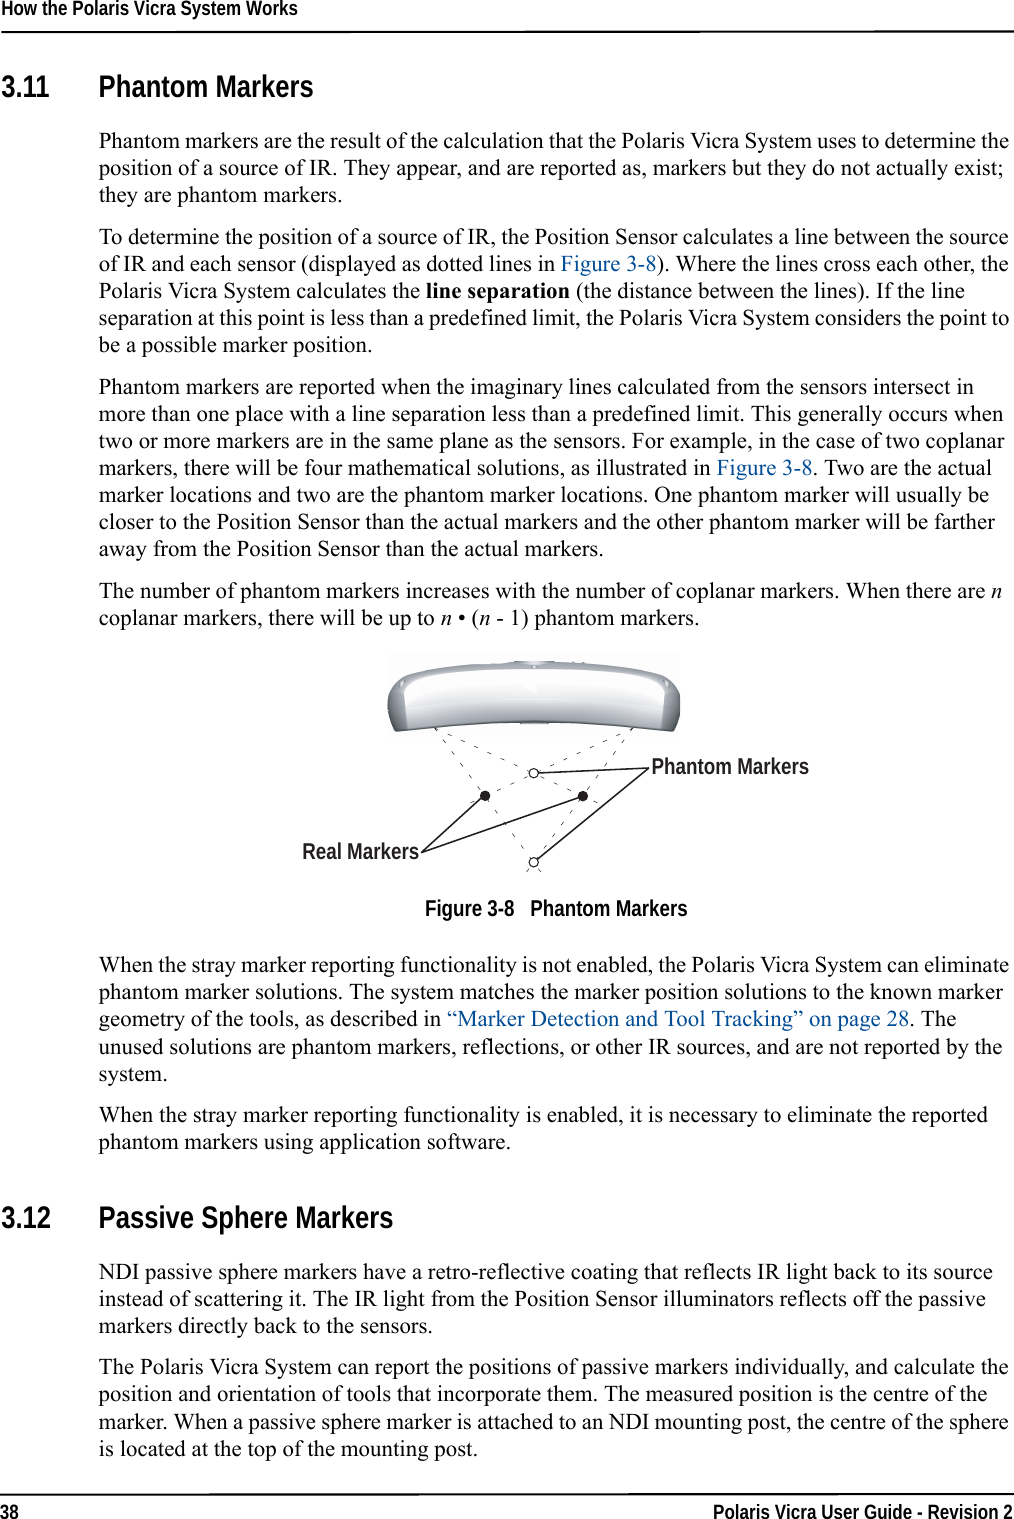 How the Polaris Vicra System Works38 Polaris Vicra User Guide - Revision 23.11 Phantom MarkersPhantom markers are the result of the calculation that the Polaris Vicra System uses to determine the position of a source of IR. They appear, and are reported as, markers but they do not actually exist; they are phantom markers.To determine the position of a source of IR, the Position Sensor calculates a line between the source of IR and each sensor (displayed as dotted lines in Figure 3-8). Where the lines cross each other, the Polaris Vicra System calculates the line separation (the distance between the lines). If the line separation at this point is less than a predefined limit, the Polaris Vicra System considers the point to be a possible marker position.Phantom markers are reported when the imaginary lines calculated from the sensors intersect in more than one place with a line separation less than a predefined limit. This generally occurs when two or more markers are in the same plane as the sensors. For example, in the case of two coplanar markers, there will be four mathematical solutions, as illustrated in Figure 3-8. Two are the actual marker locations and two are the phantom marker locations. One phantom marker will usually be closer to the Position Sensor than the actual markers and the other phantom marker will be farther away from the Position Sensor than the actual markers. The number of phantom markers increases with the number of coplanar markers. When there are n coplanar markers, there will be up to n • (n - 1) phantom markers.Figure 3-8   Phantom MarkersWhen the stray marker reporting functionality is not enabled, the Polaris Vicra System can eliminate phantom marker solutions. The system matches the marker position solutions to the known marker geometry of the tools, as described in “Marker Detection and Tool Tracking” on page 28. The unused solutions are phantom markers, reflections, or other IR sources, and are not reported by the system.When the stray marker reporting functionality is enabled, it is necessary to eliminate the reported phantom markers using application software.3.12 Passive Sphere MarkersNDI passive sphere markers have a retro-reflective coating that reflects IR light back to its source instead of scattering it. The IR light from the Position Sensor illuminators reflects off the passive markers directly back to the sensors.The Polaris Vicra System can report the positions of passive markers individually, and calculate the position and orientation of tools that incorporate them. The measured position is the centre of the marker. When a passive sphere marker is attached to an NDI mounting post, the centre of the sphere is located at the top of the mounting post.Phantom MarkersReal Markers